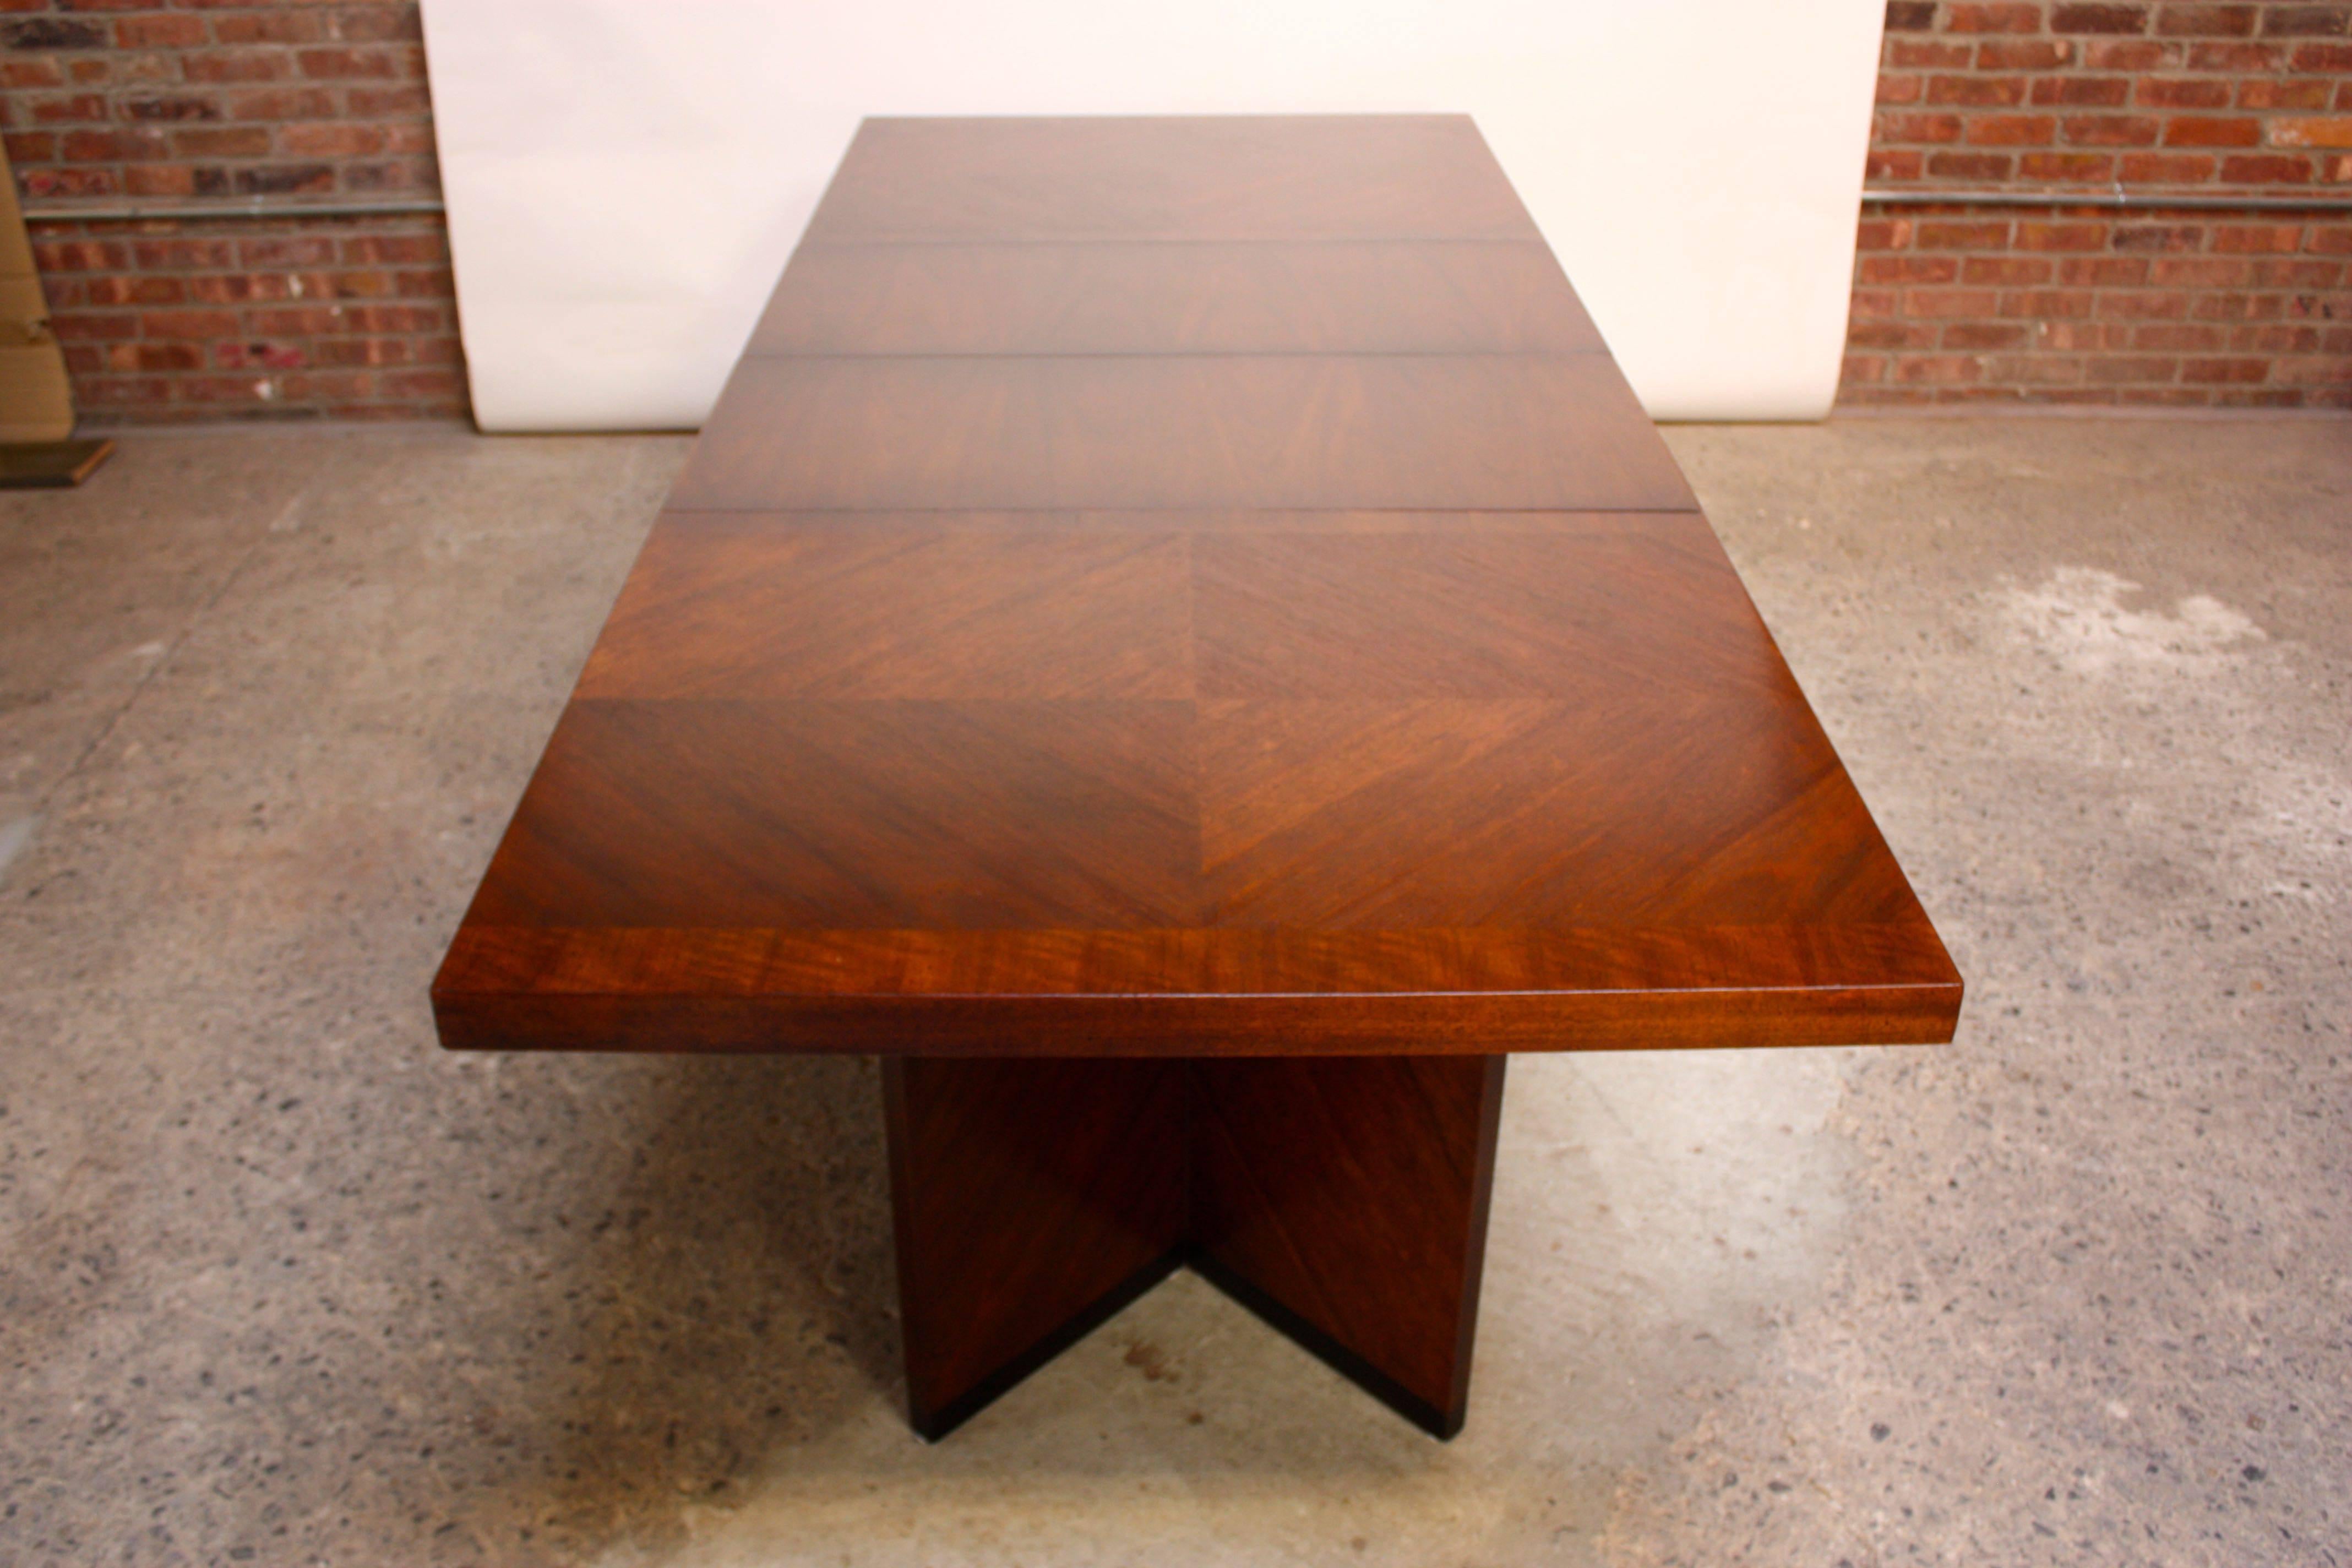 This Brutalist-style walnut table was manufactured by Lane in the 1960s and features two crotch grain walnut veneer extensions which add nice contrast to the parquet checkered pattern on the two stationary ends of the table. The tabletop sits upon